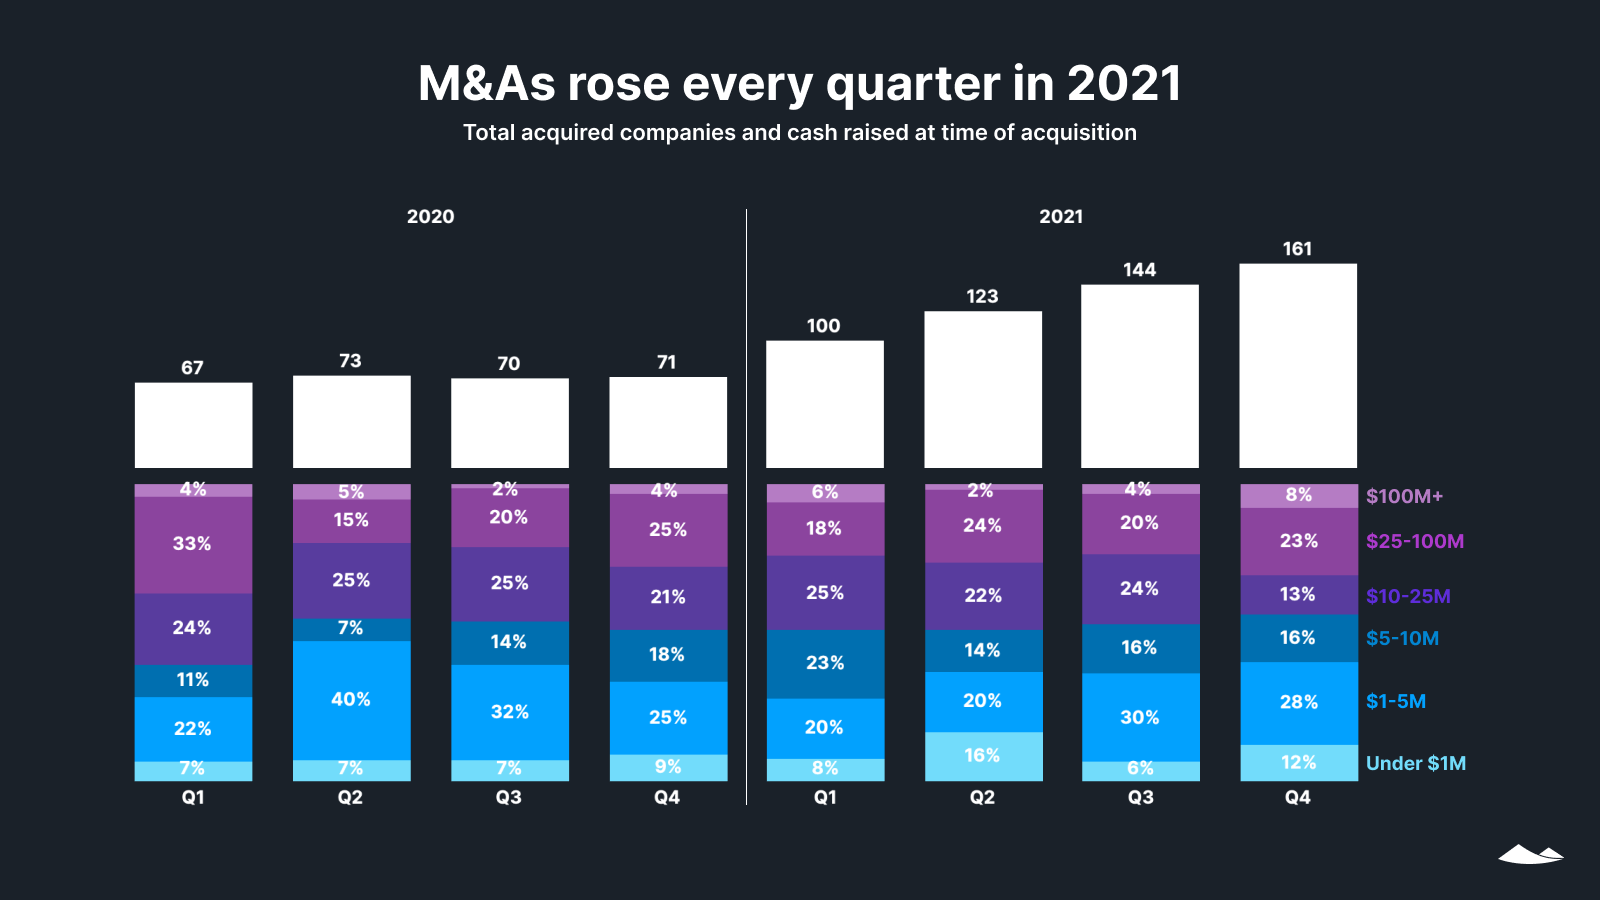 Mergers and acquisitions rose every quarter in 2021